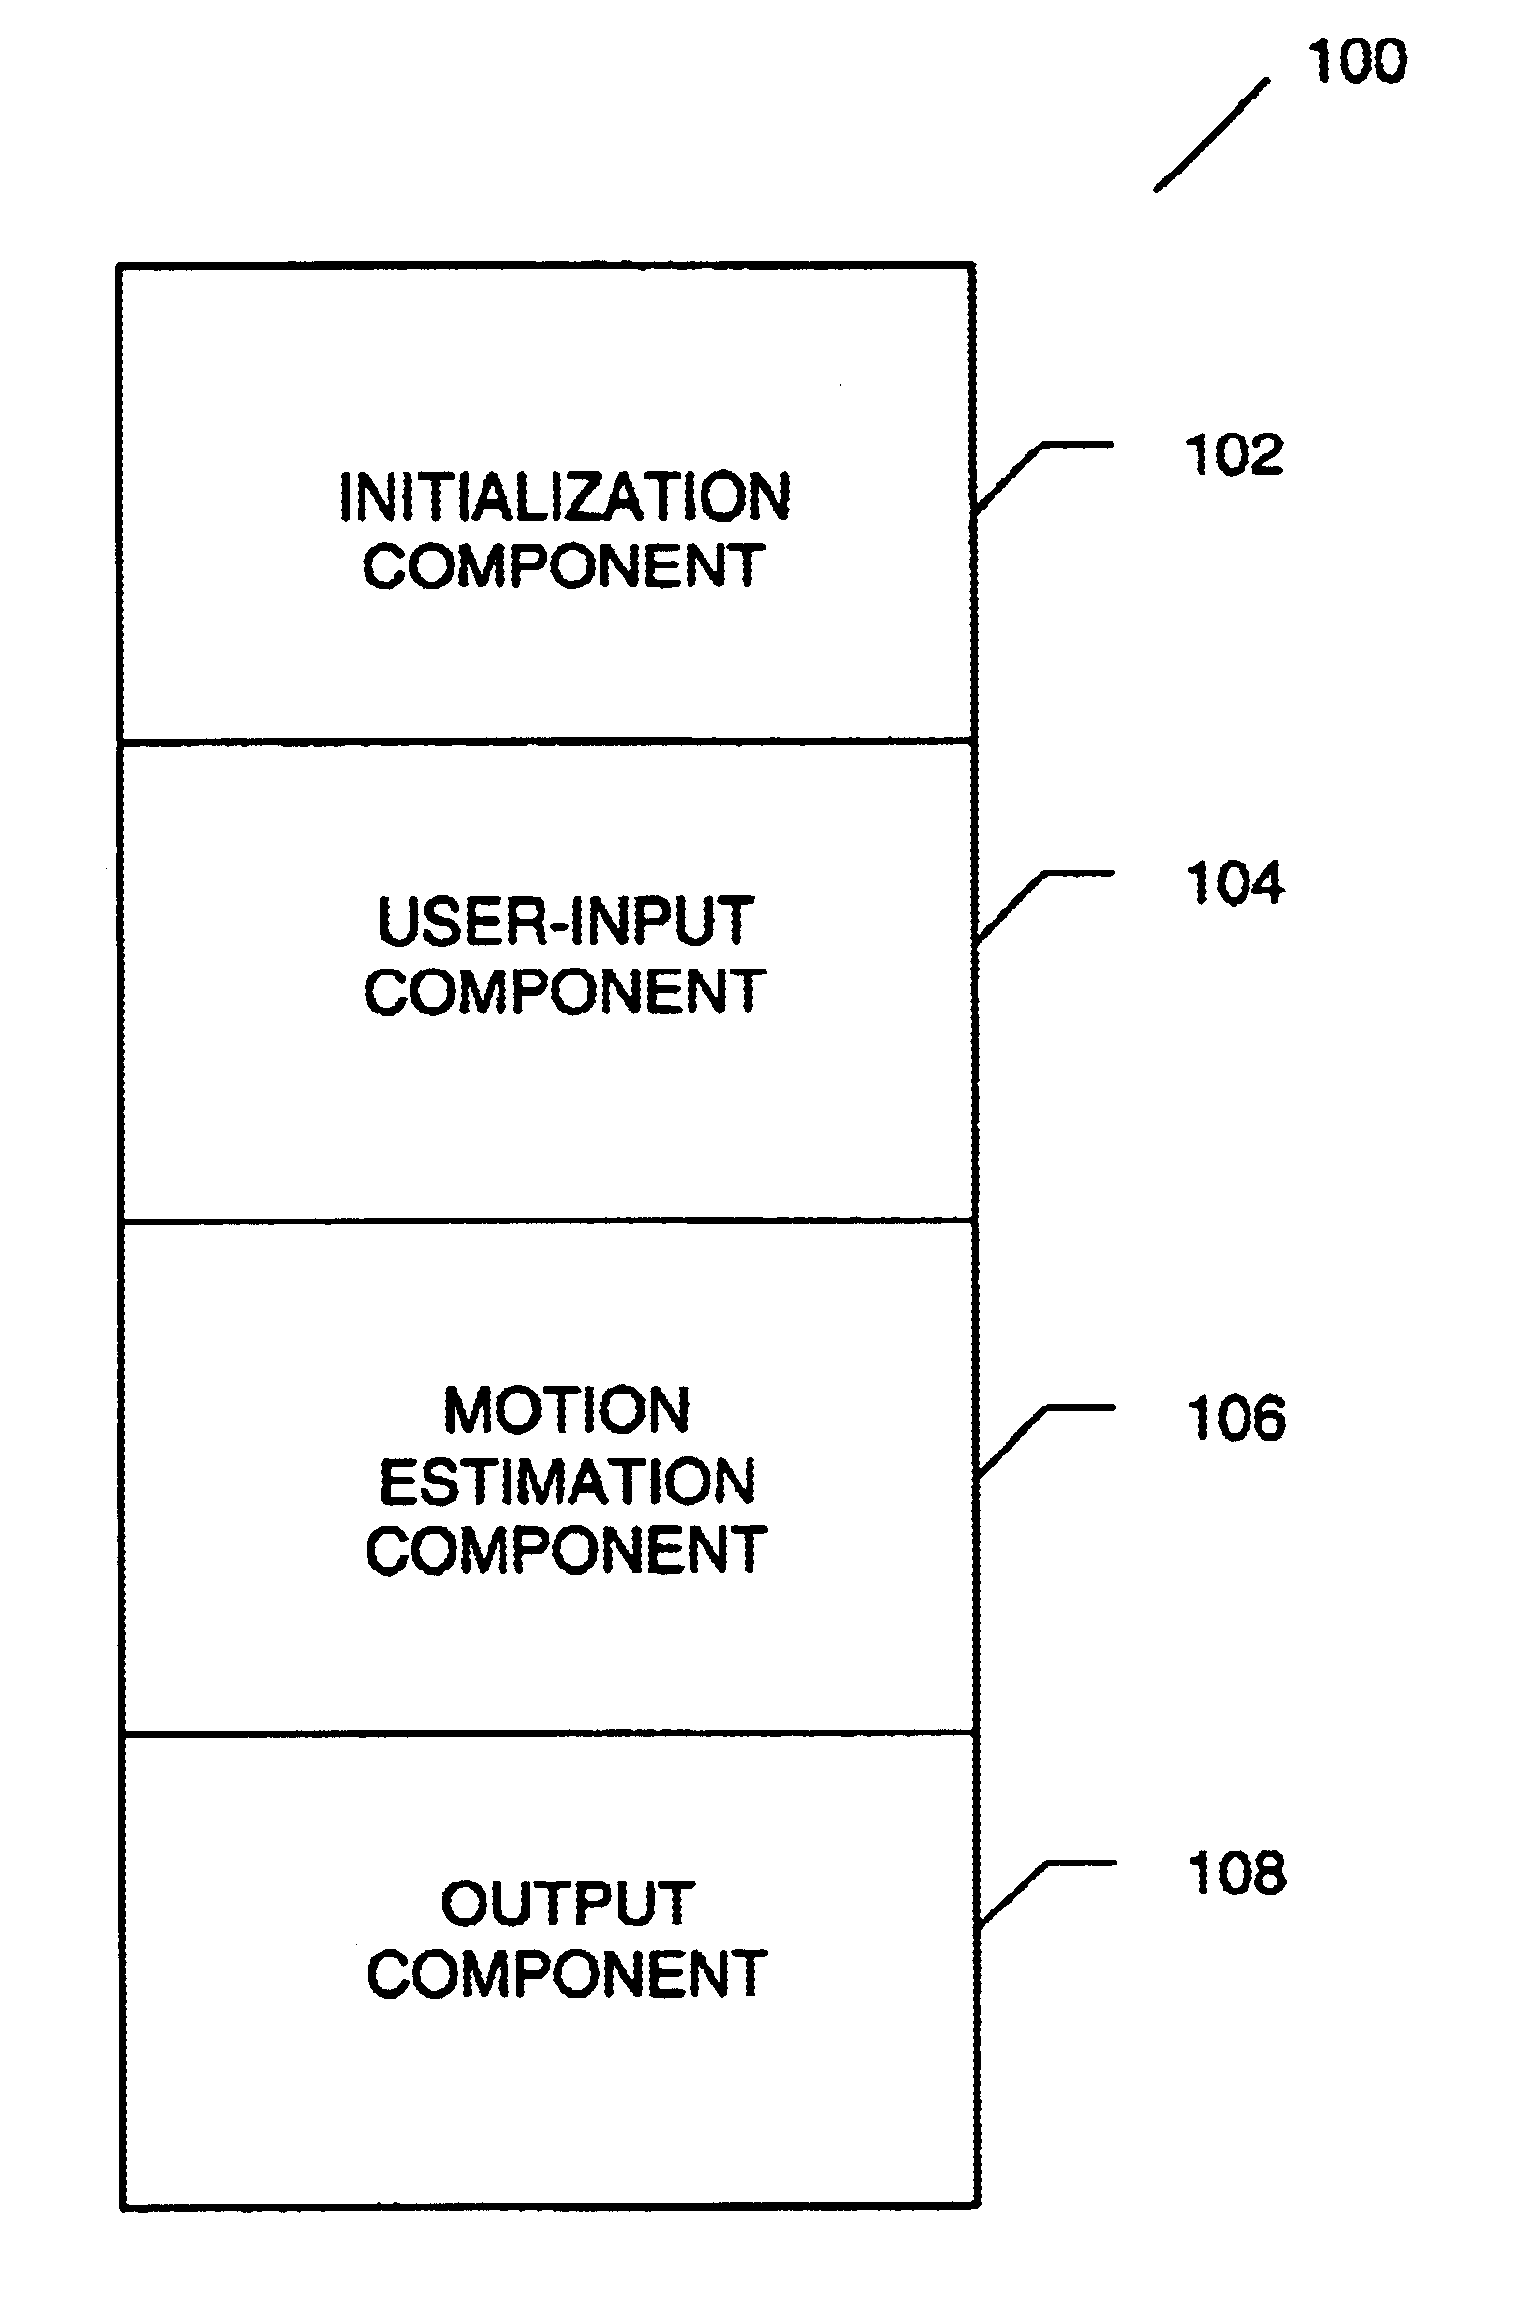 Systems and methods for tracking objects in video sequences